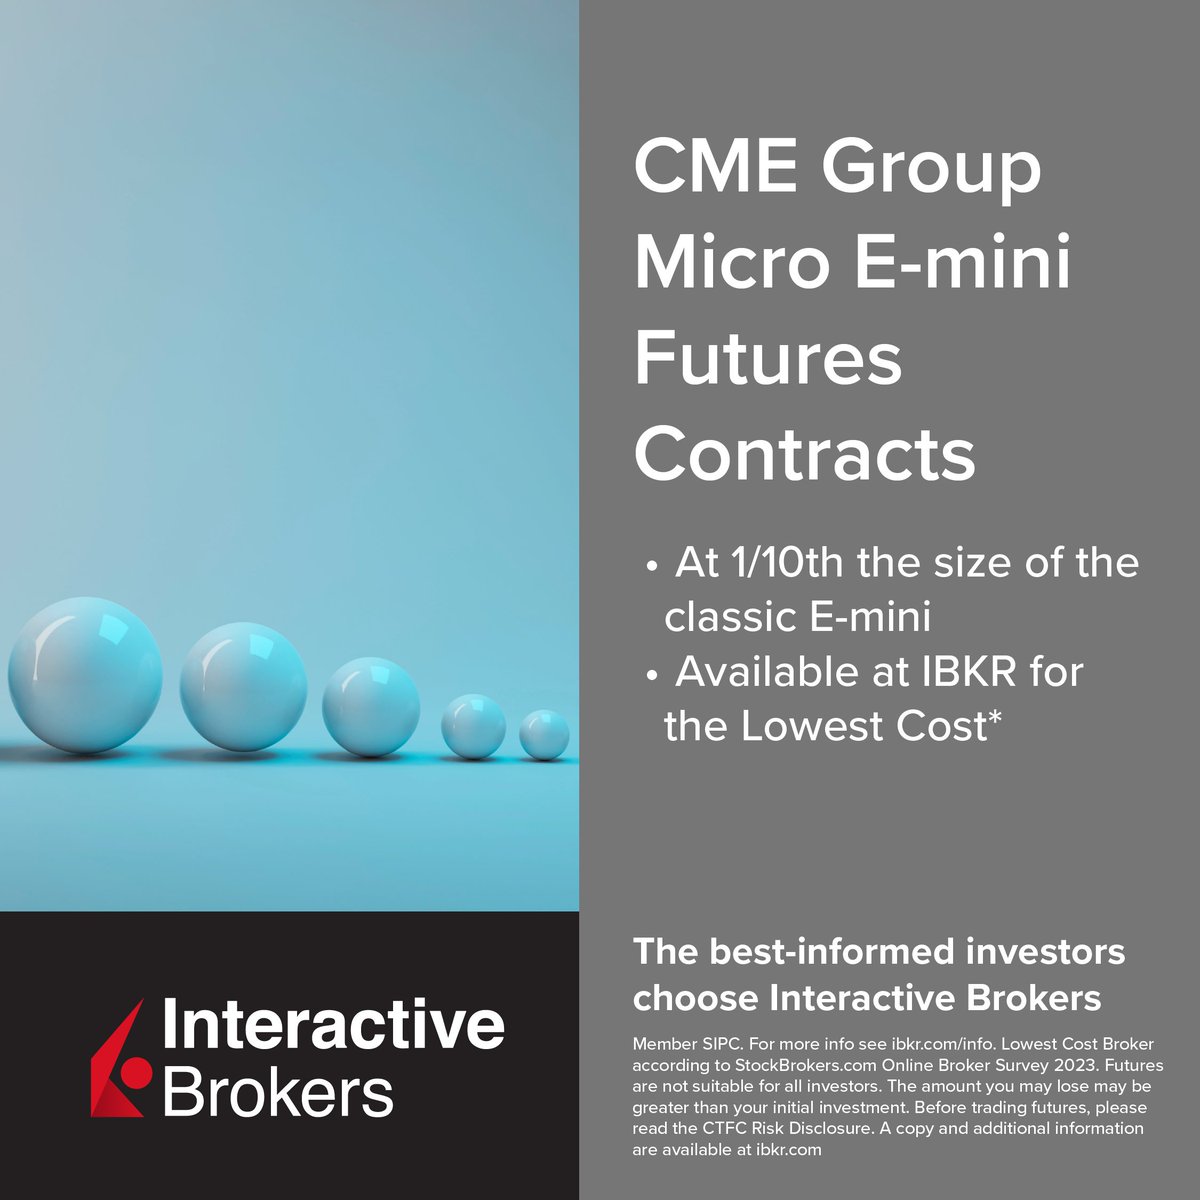 🔍 Looking for micro futures? You can find #CME Micro E-mini #futures contracts at IBKR for the lowest cost. Discover more at IBKR: spr.ly/eminit